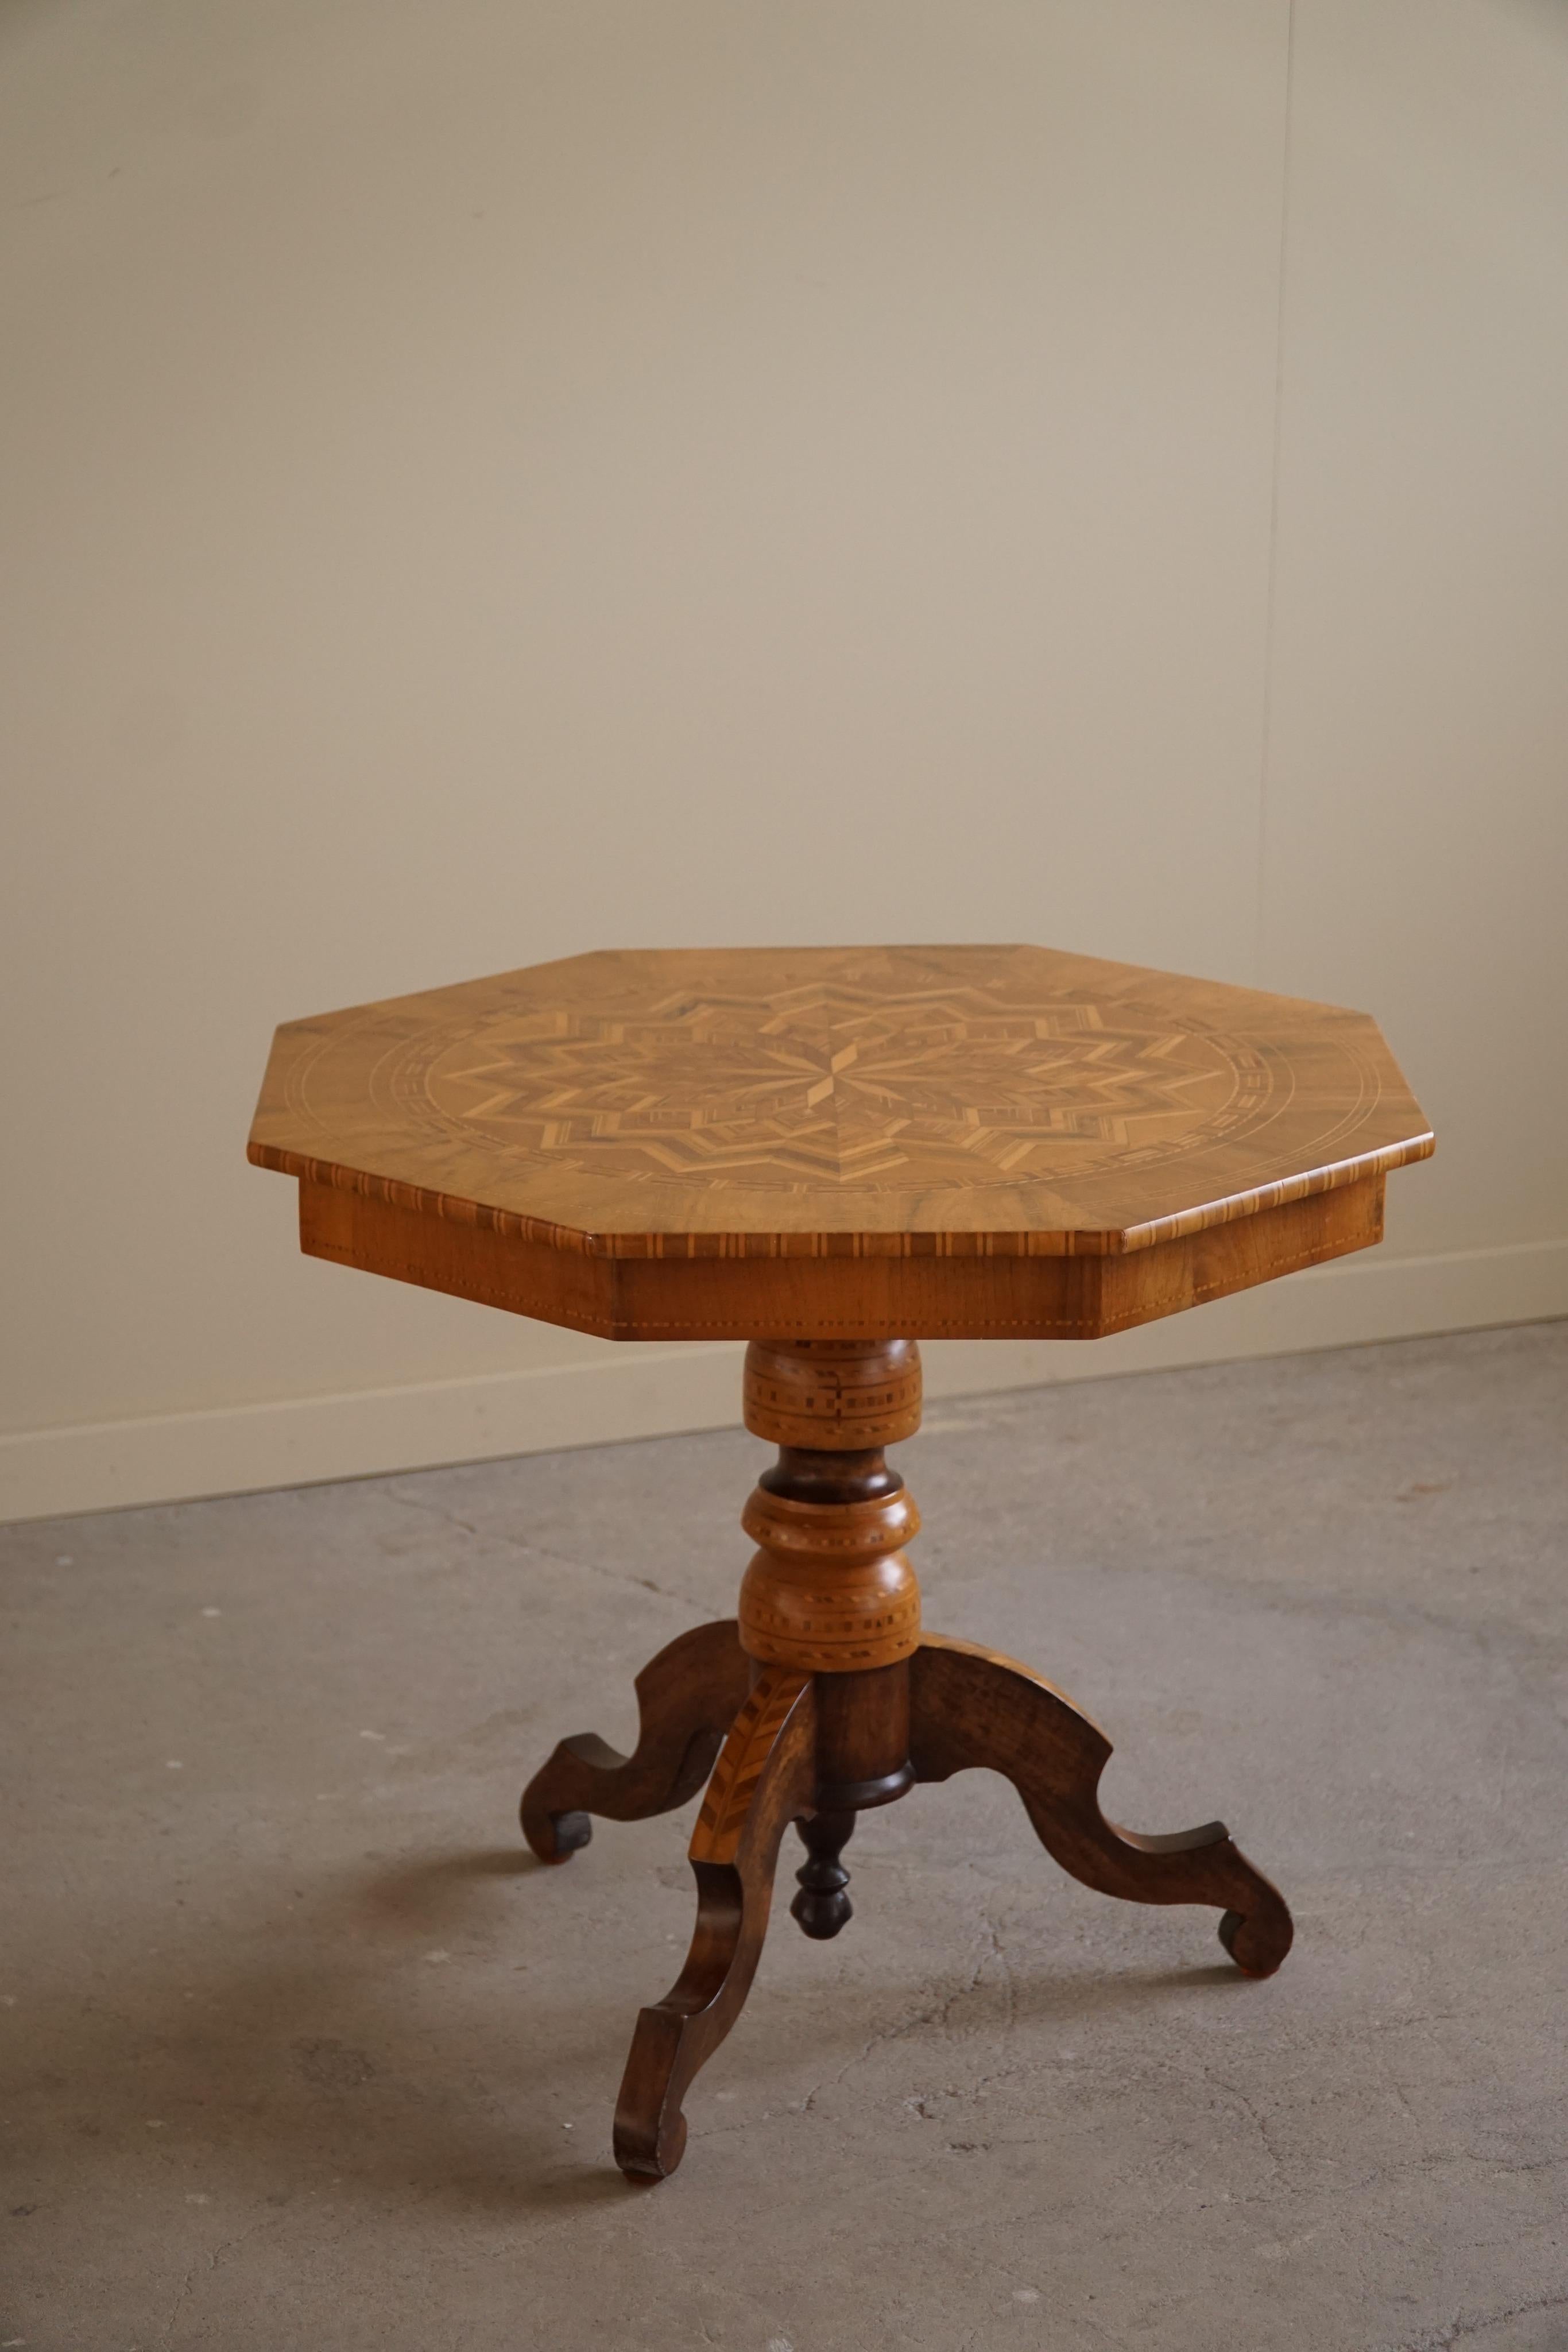 Danish Art Deco, Octagon Side Table in Birch With Intarsia Top, 1940s For Sale 7